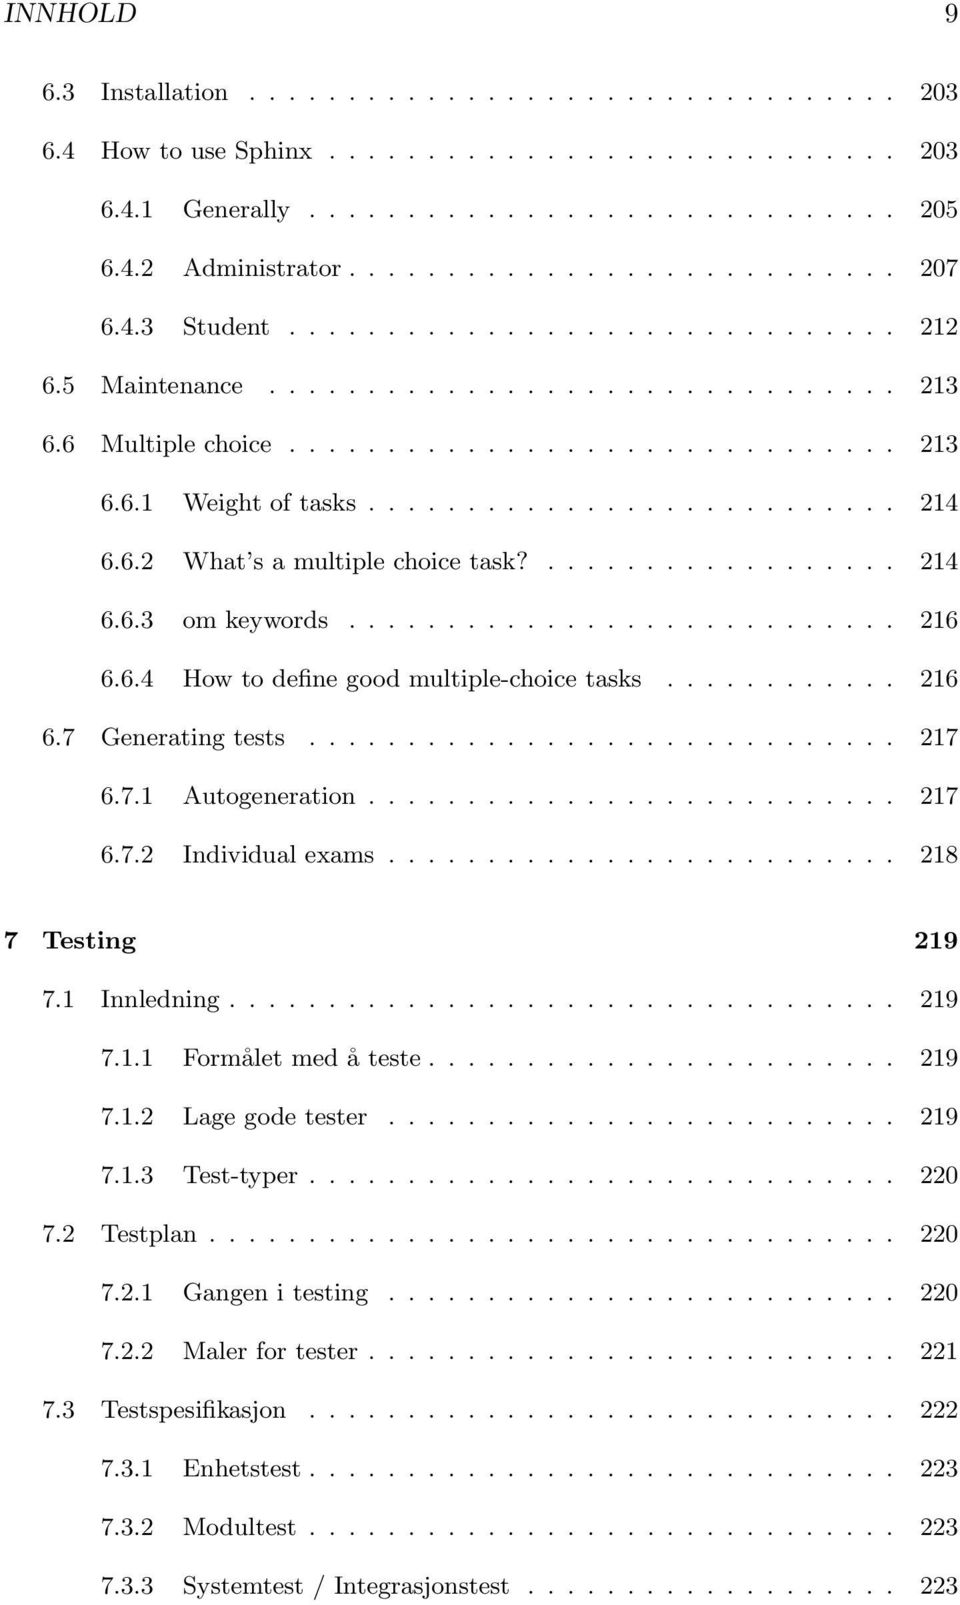 6.2 What s a multiple choice task?.................. 214 6.6.3 om keywords............................ 216 6.6.4 How to define good multiple-choice tasks............ 216 6.7 Generating tests.............................. 217 6.